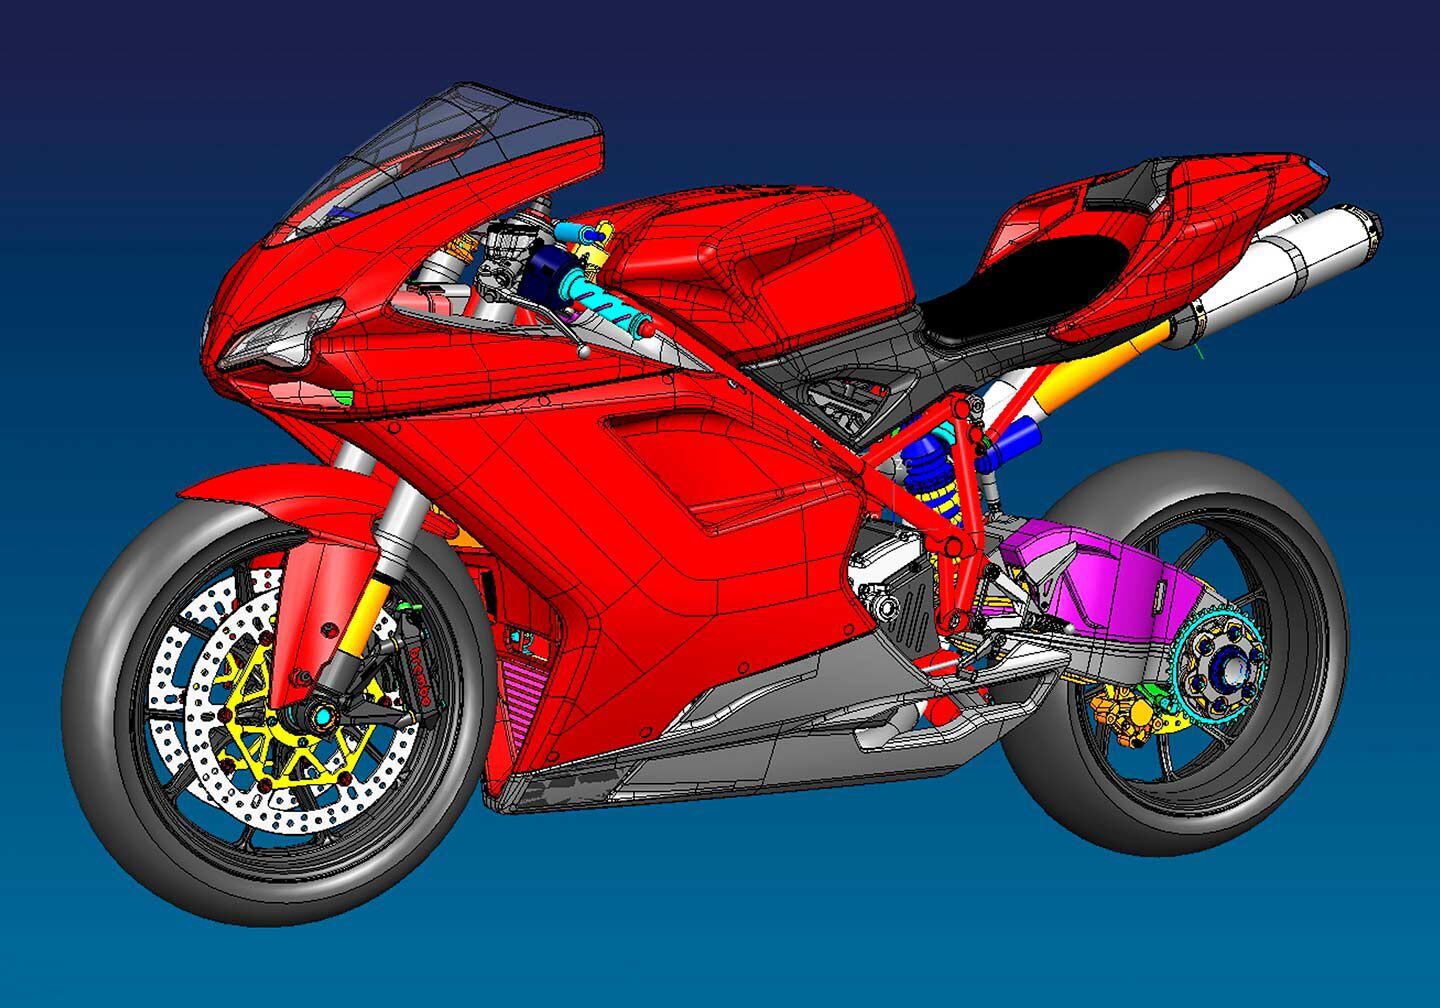 The 1098 was Ferraresi and Domenicali’s first of many projects together. Here a computer model shows a near-final version.